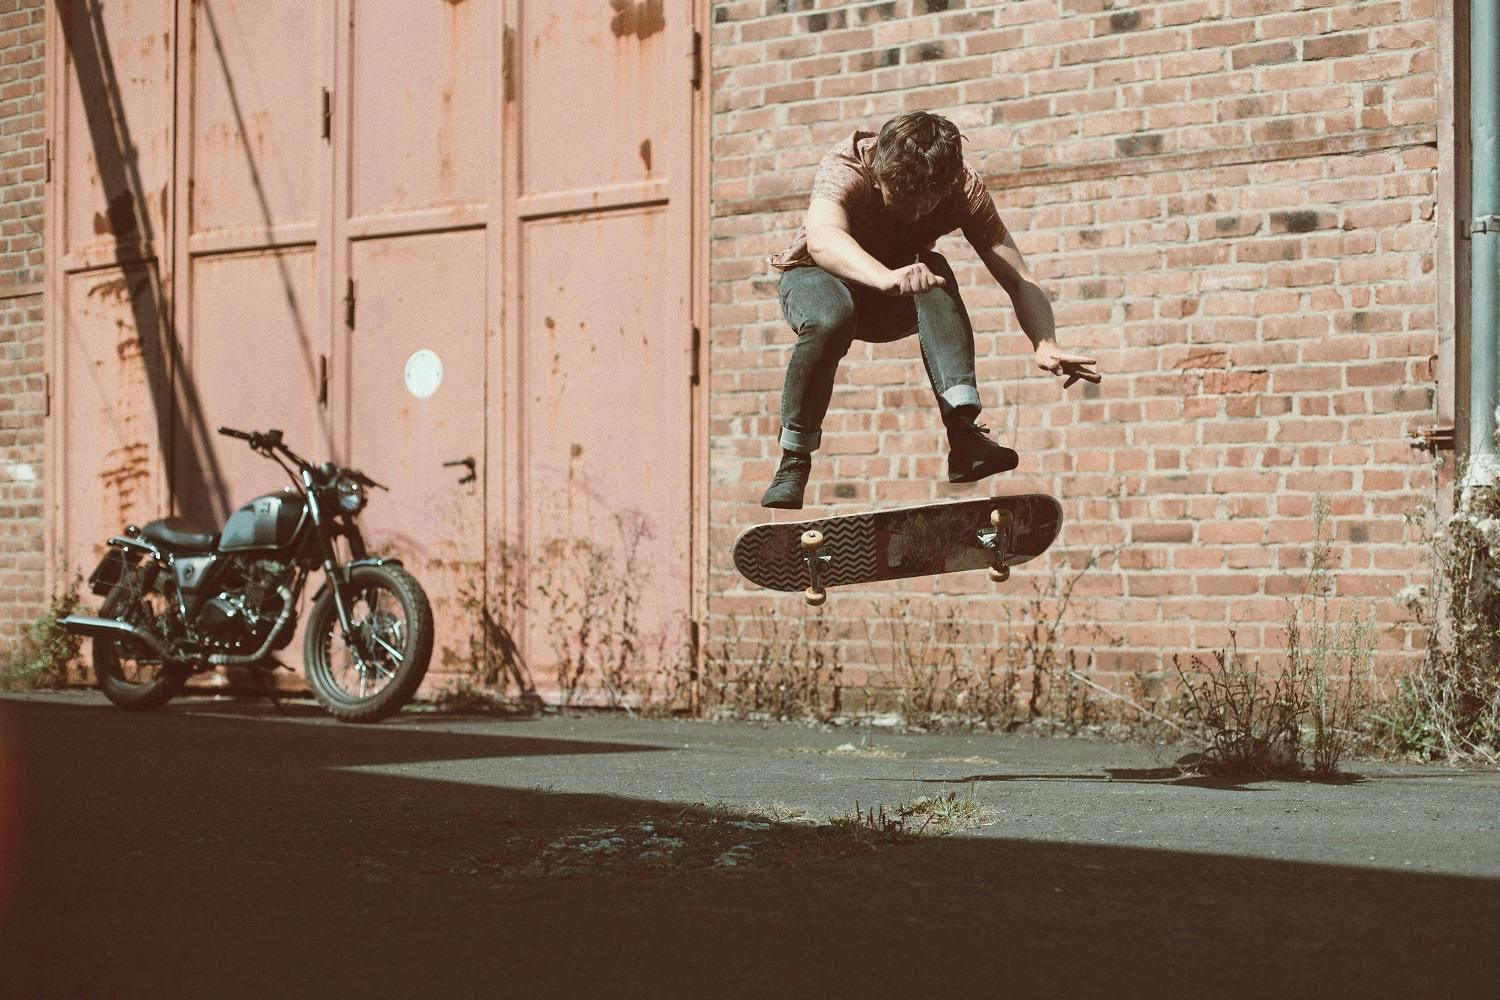 Rider of the Month Sidney doing a kick flip on a skateboard with his Brixton Cromwell 125 in Timberwolf Grey parked in the back